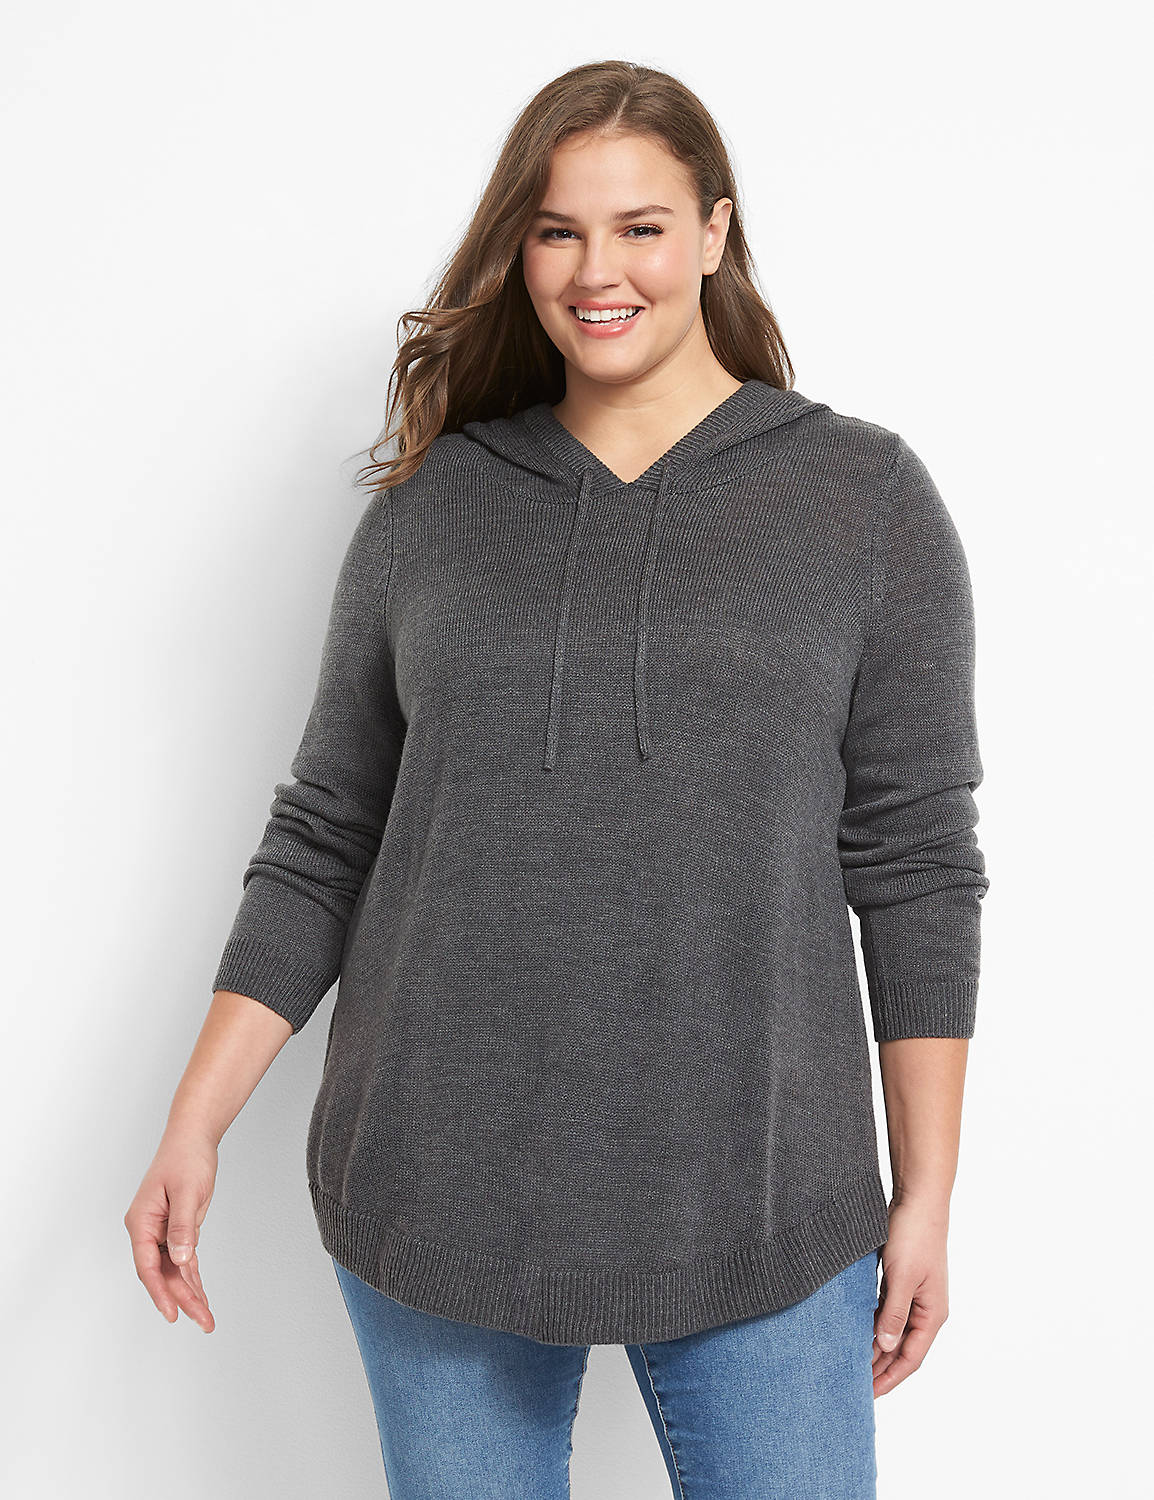 Curved-Hem Hooded Sweater Tunic Product Image 1